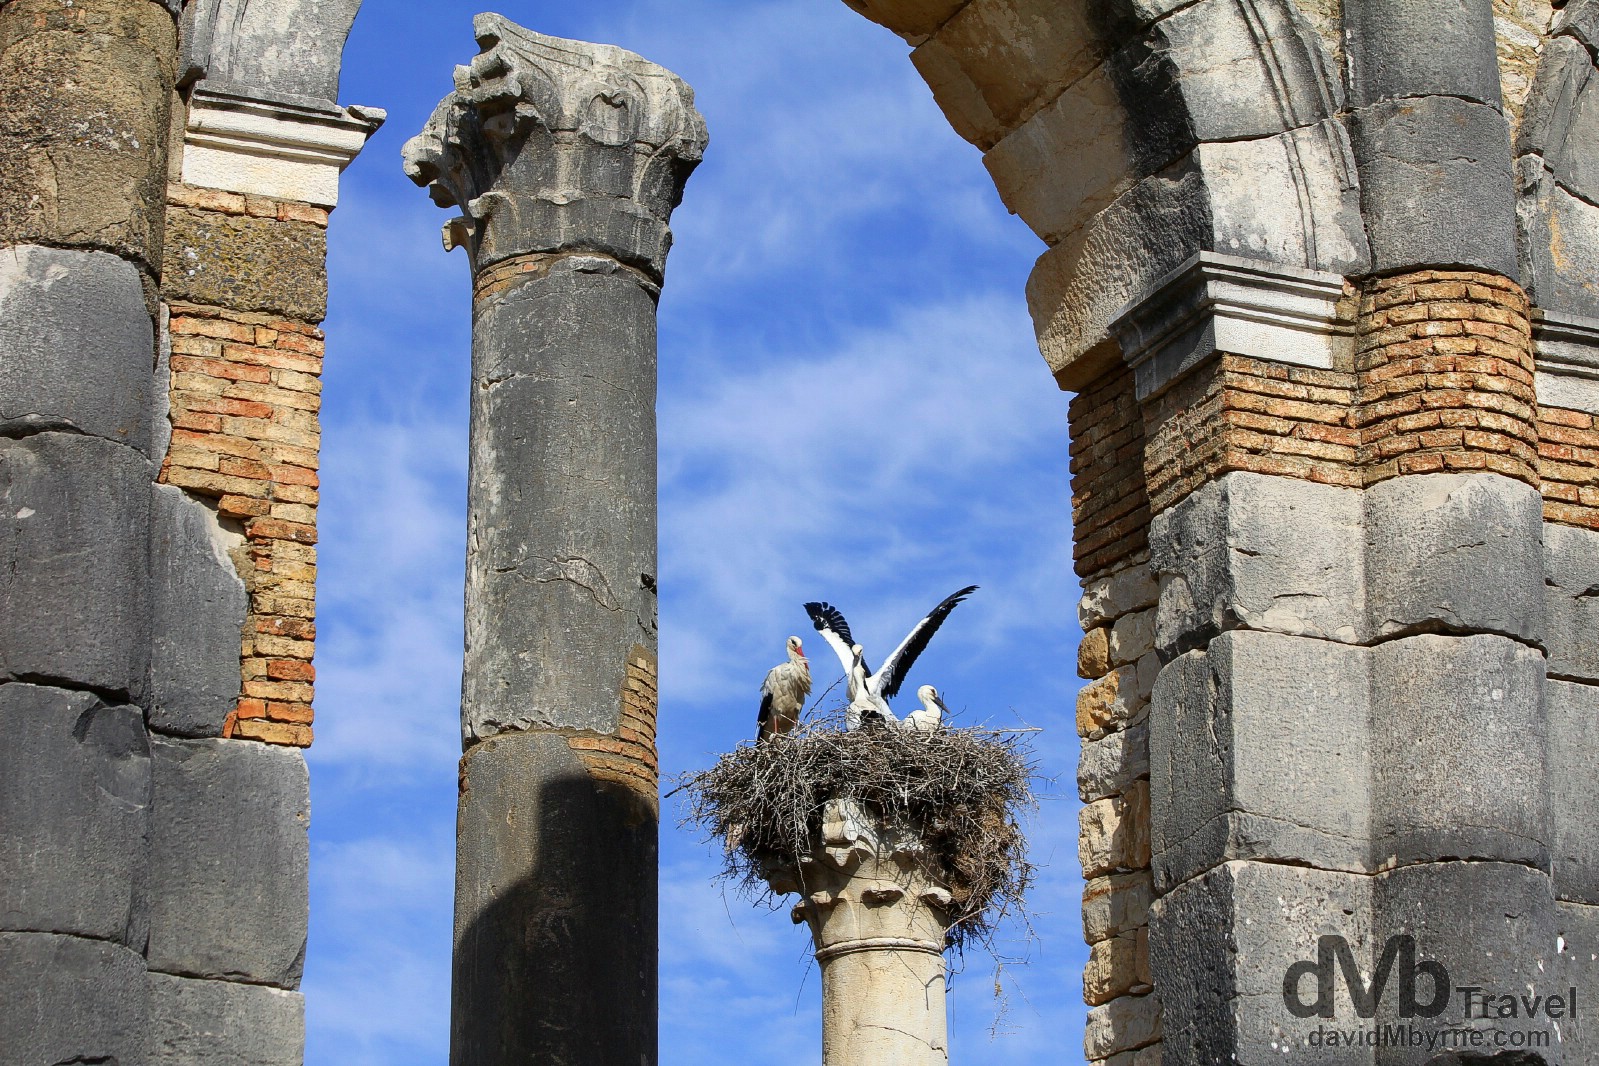 Storks as seen through arches of the Forum at the UNESCO-listed Roman ruins of Volubilis in northern Morocco. May 25th, 2014.